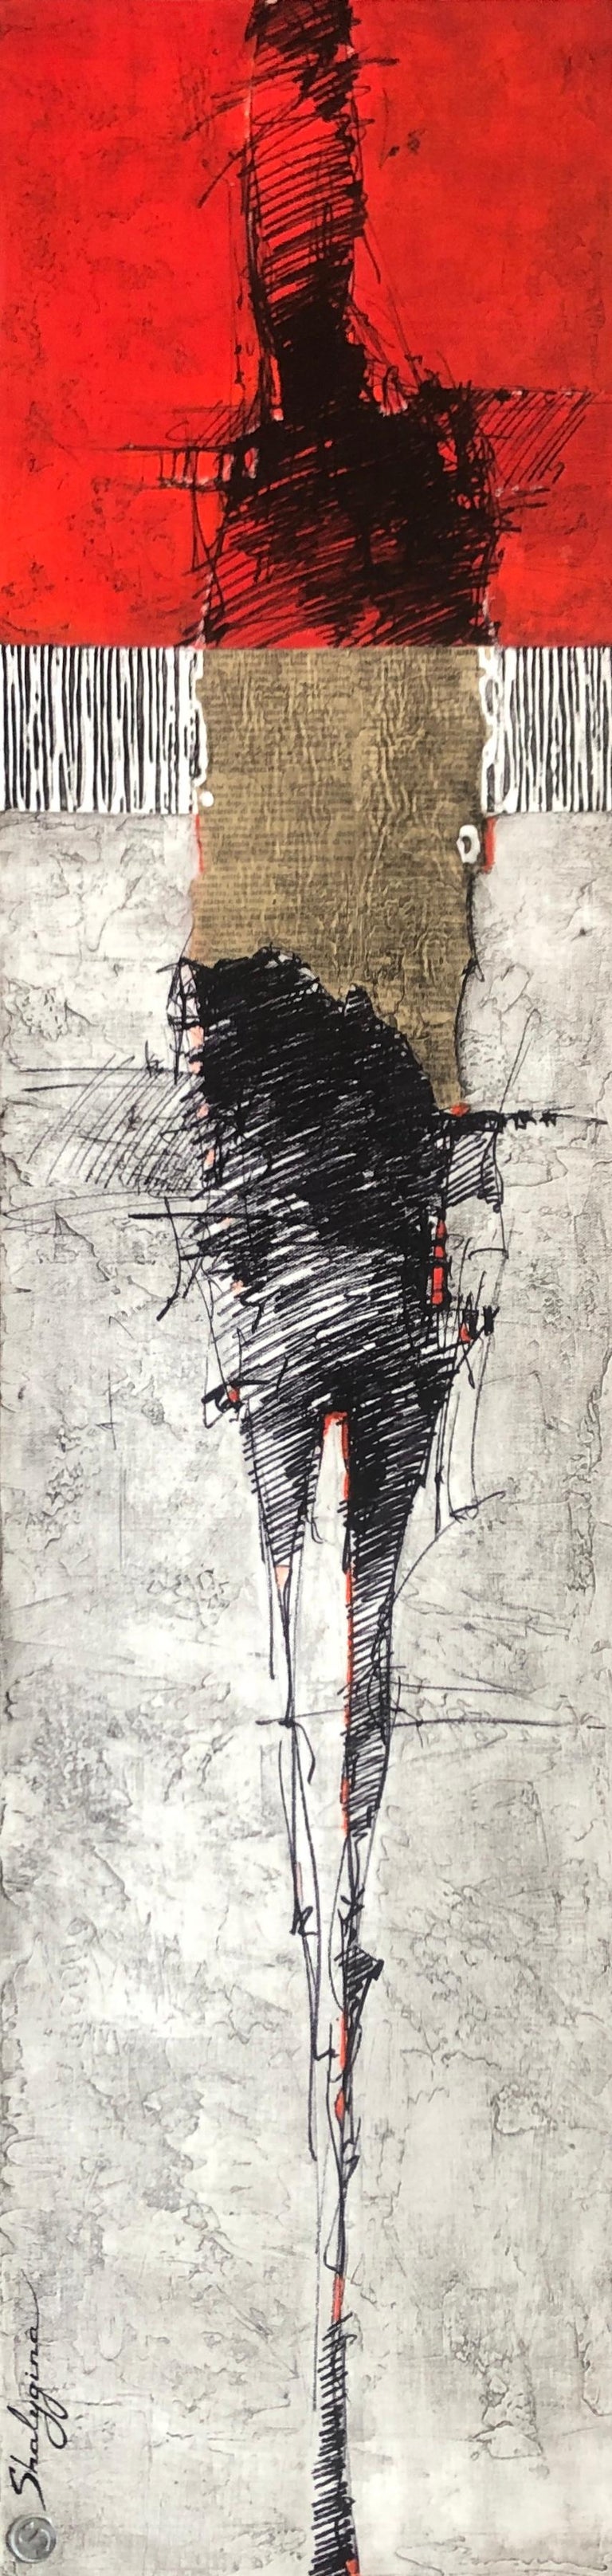 Svetlana Shalygina Abstract Painting - Orange Red Gray Abstract Figure Drawing Contemporary Figurative Painting 48x12